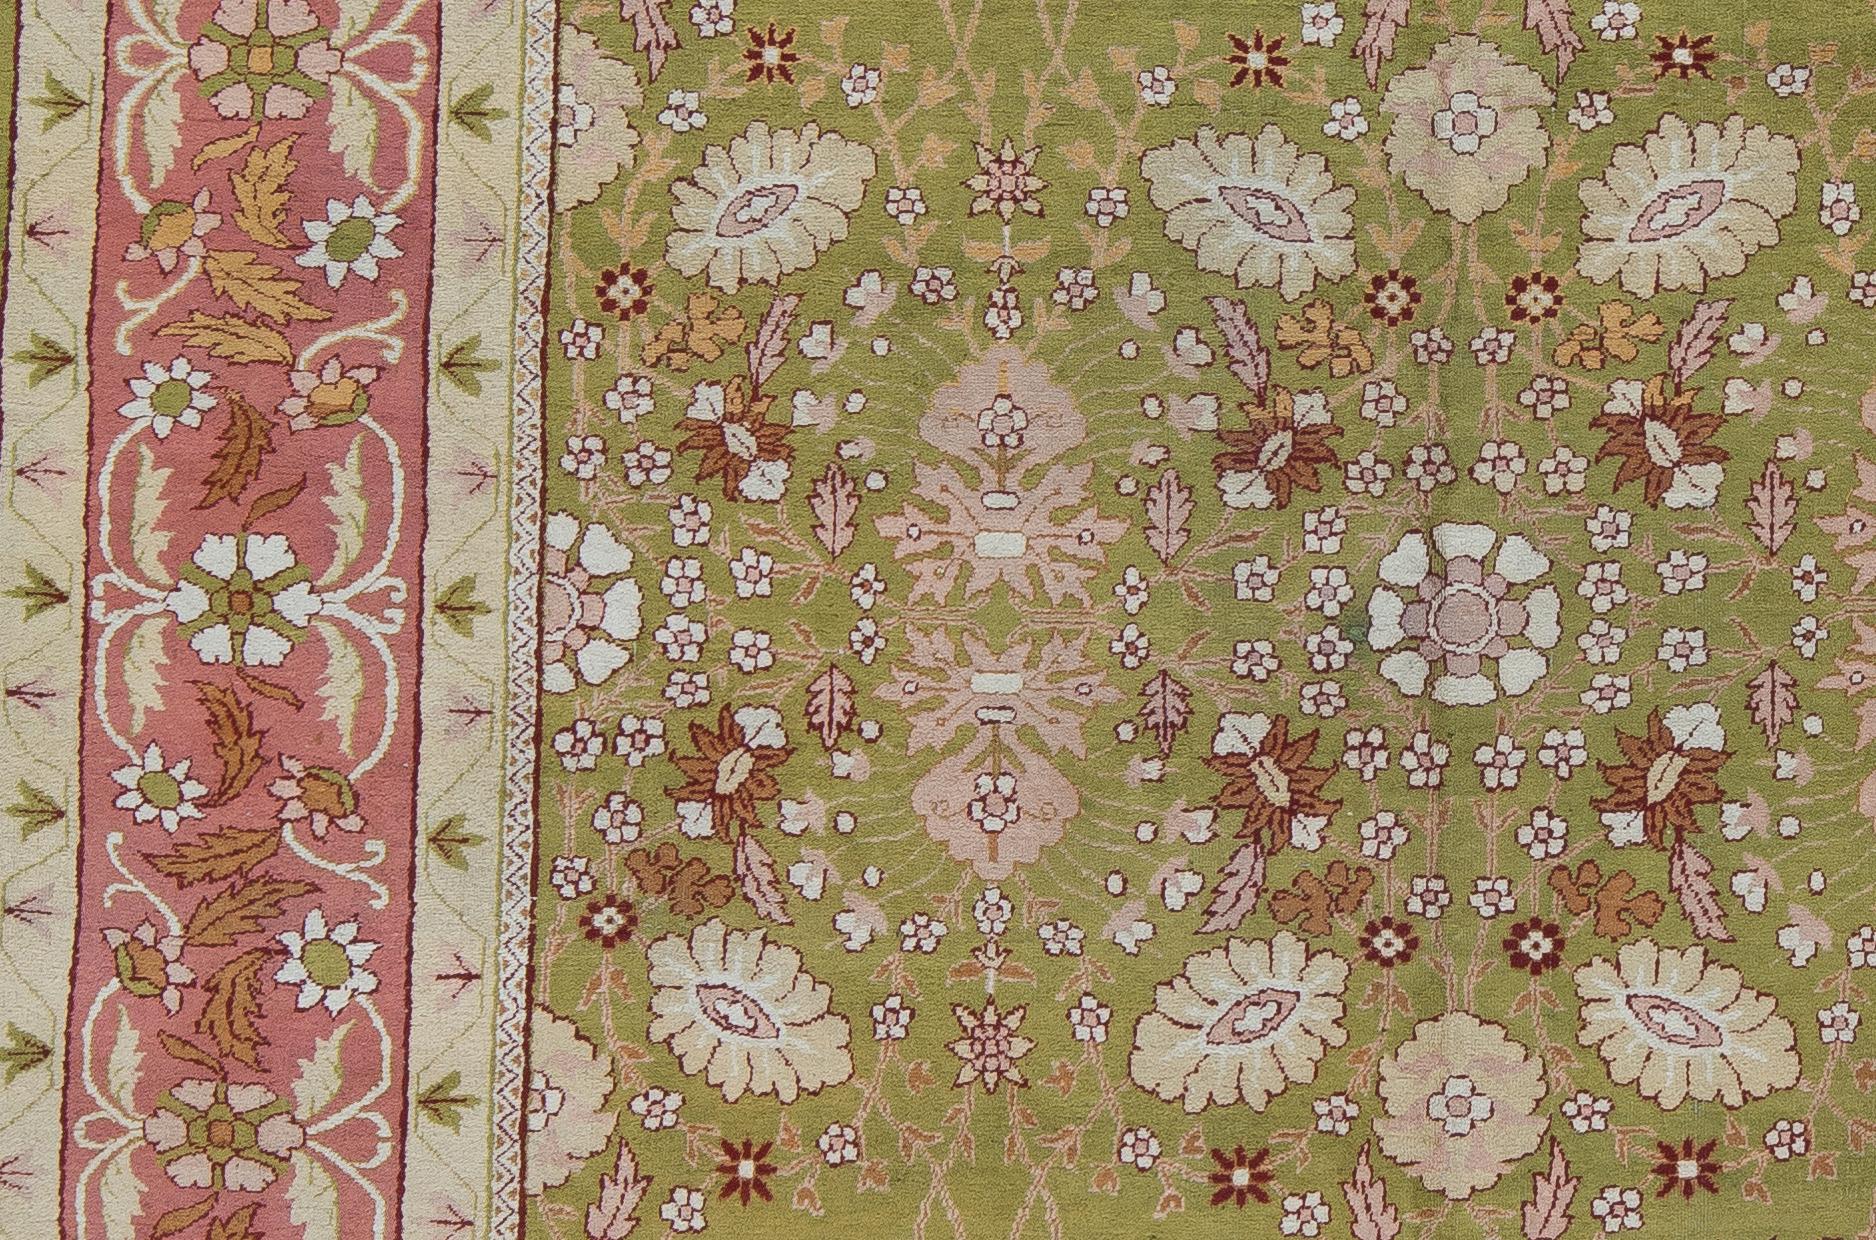 Hand-Woven Antique Amritsar Rare Green and Pink Floral Room Size Rug For Sale